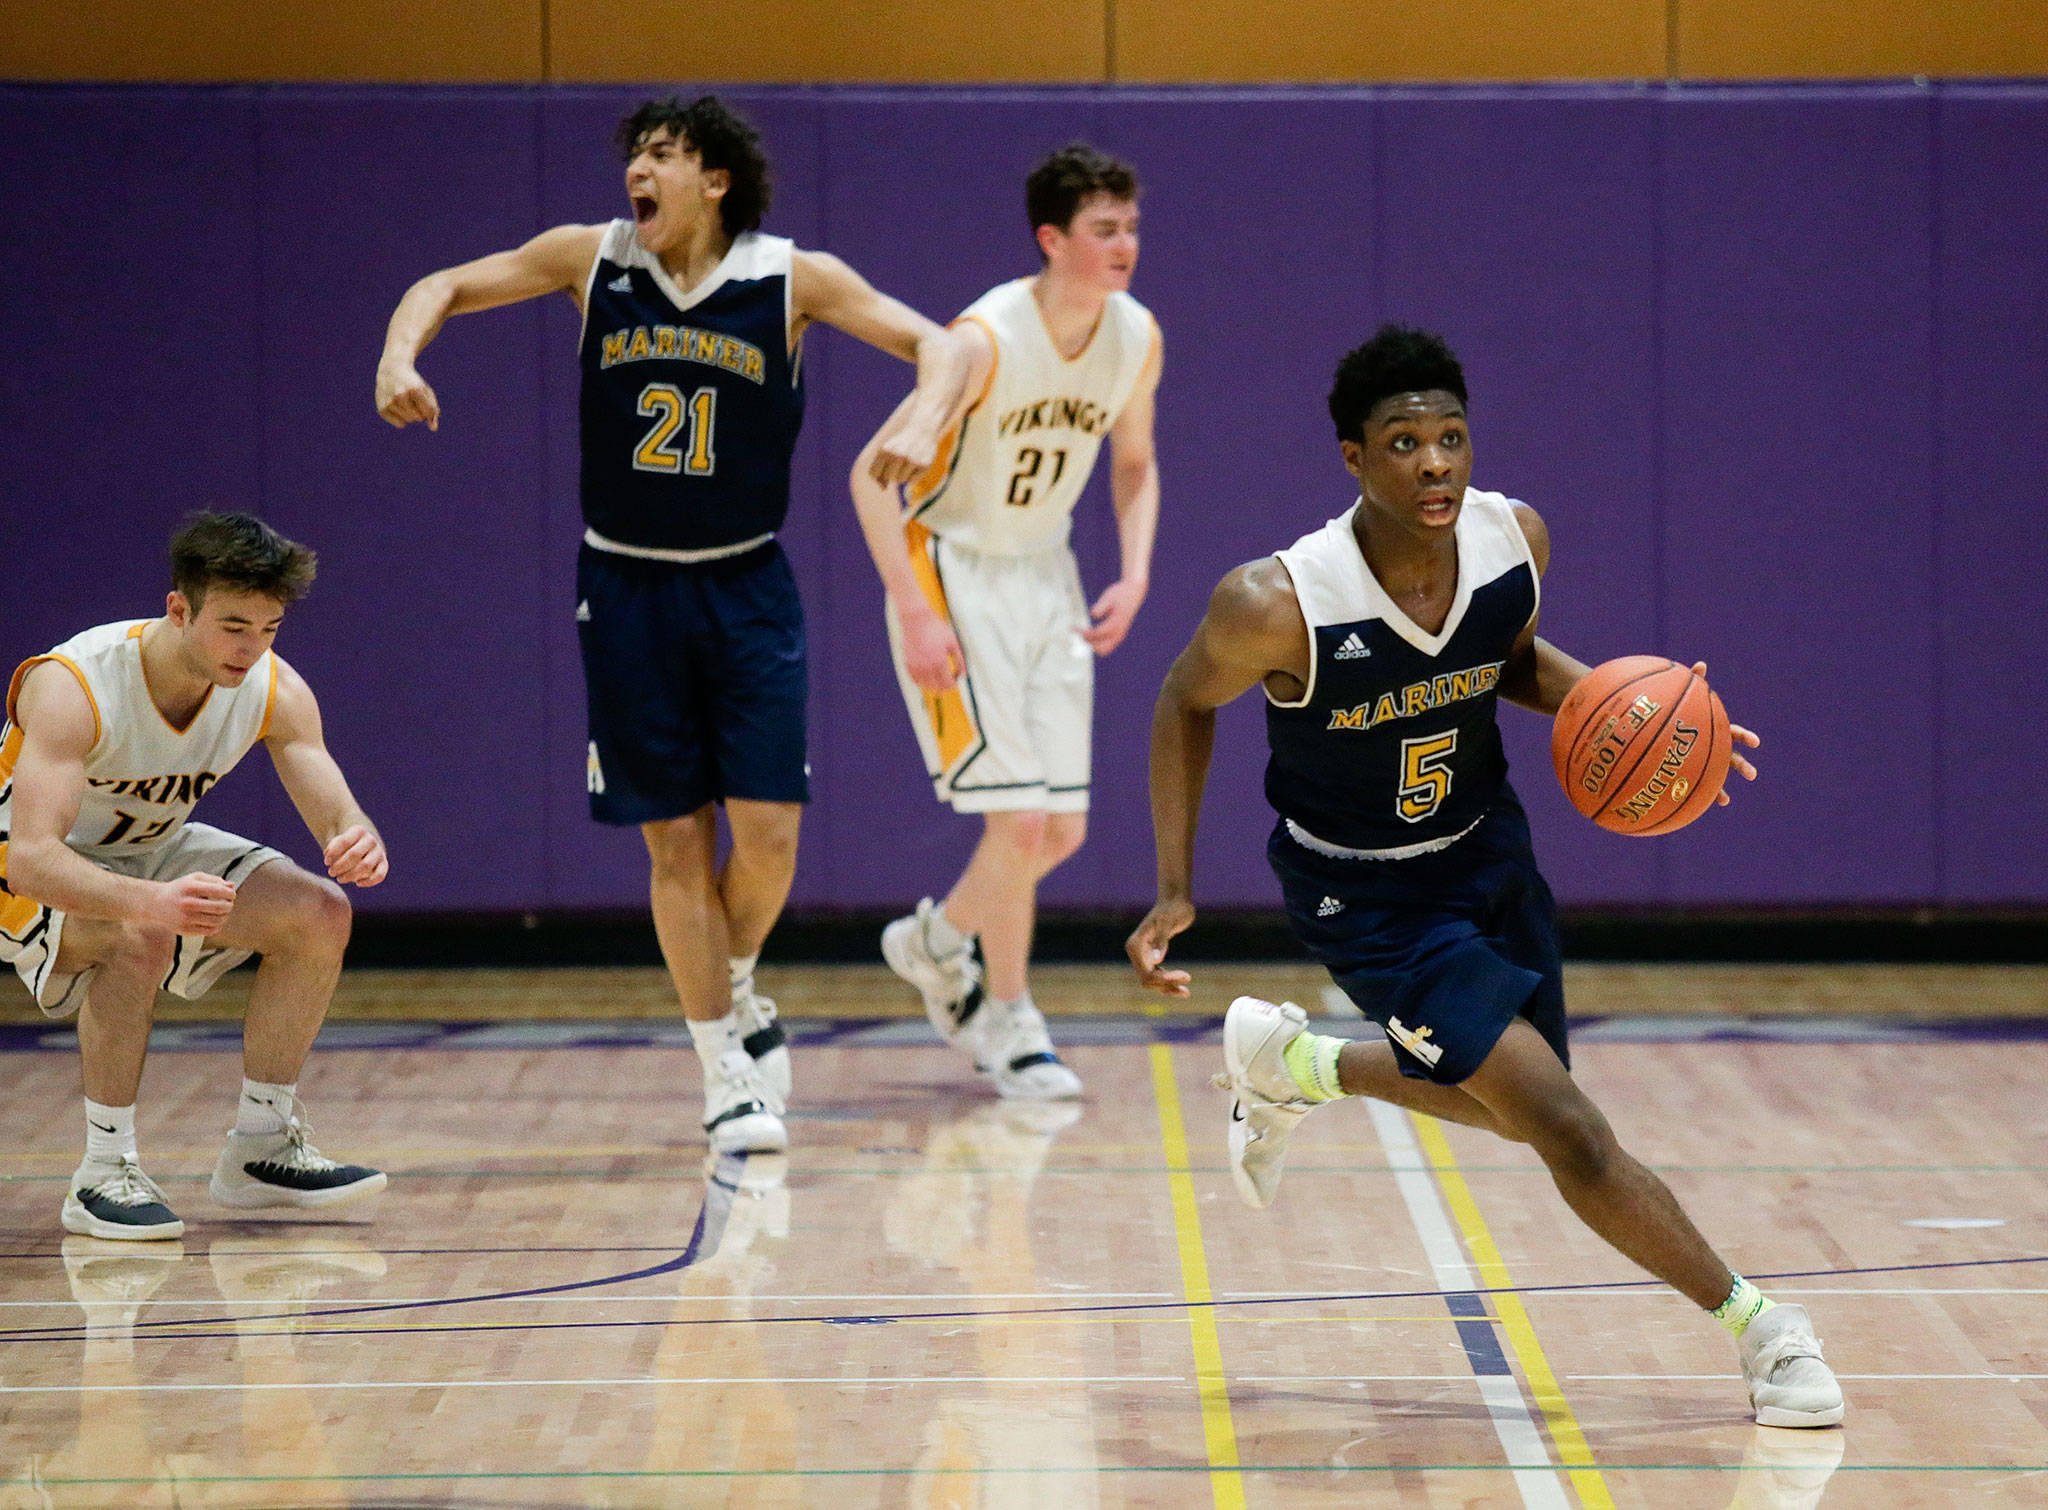 Mariner’s Tony MacArthur (21) begins to celebrate as Edwin Bough watches the clock hit zero Monday, Feb. 18, as the Marauders beat Inglemoor 50-47 in a Class 4A Wes-King District Tournament game at North Creek High in Bothell. (Andy Bronson / The Herald)